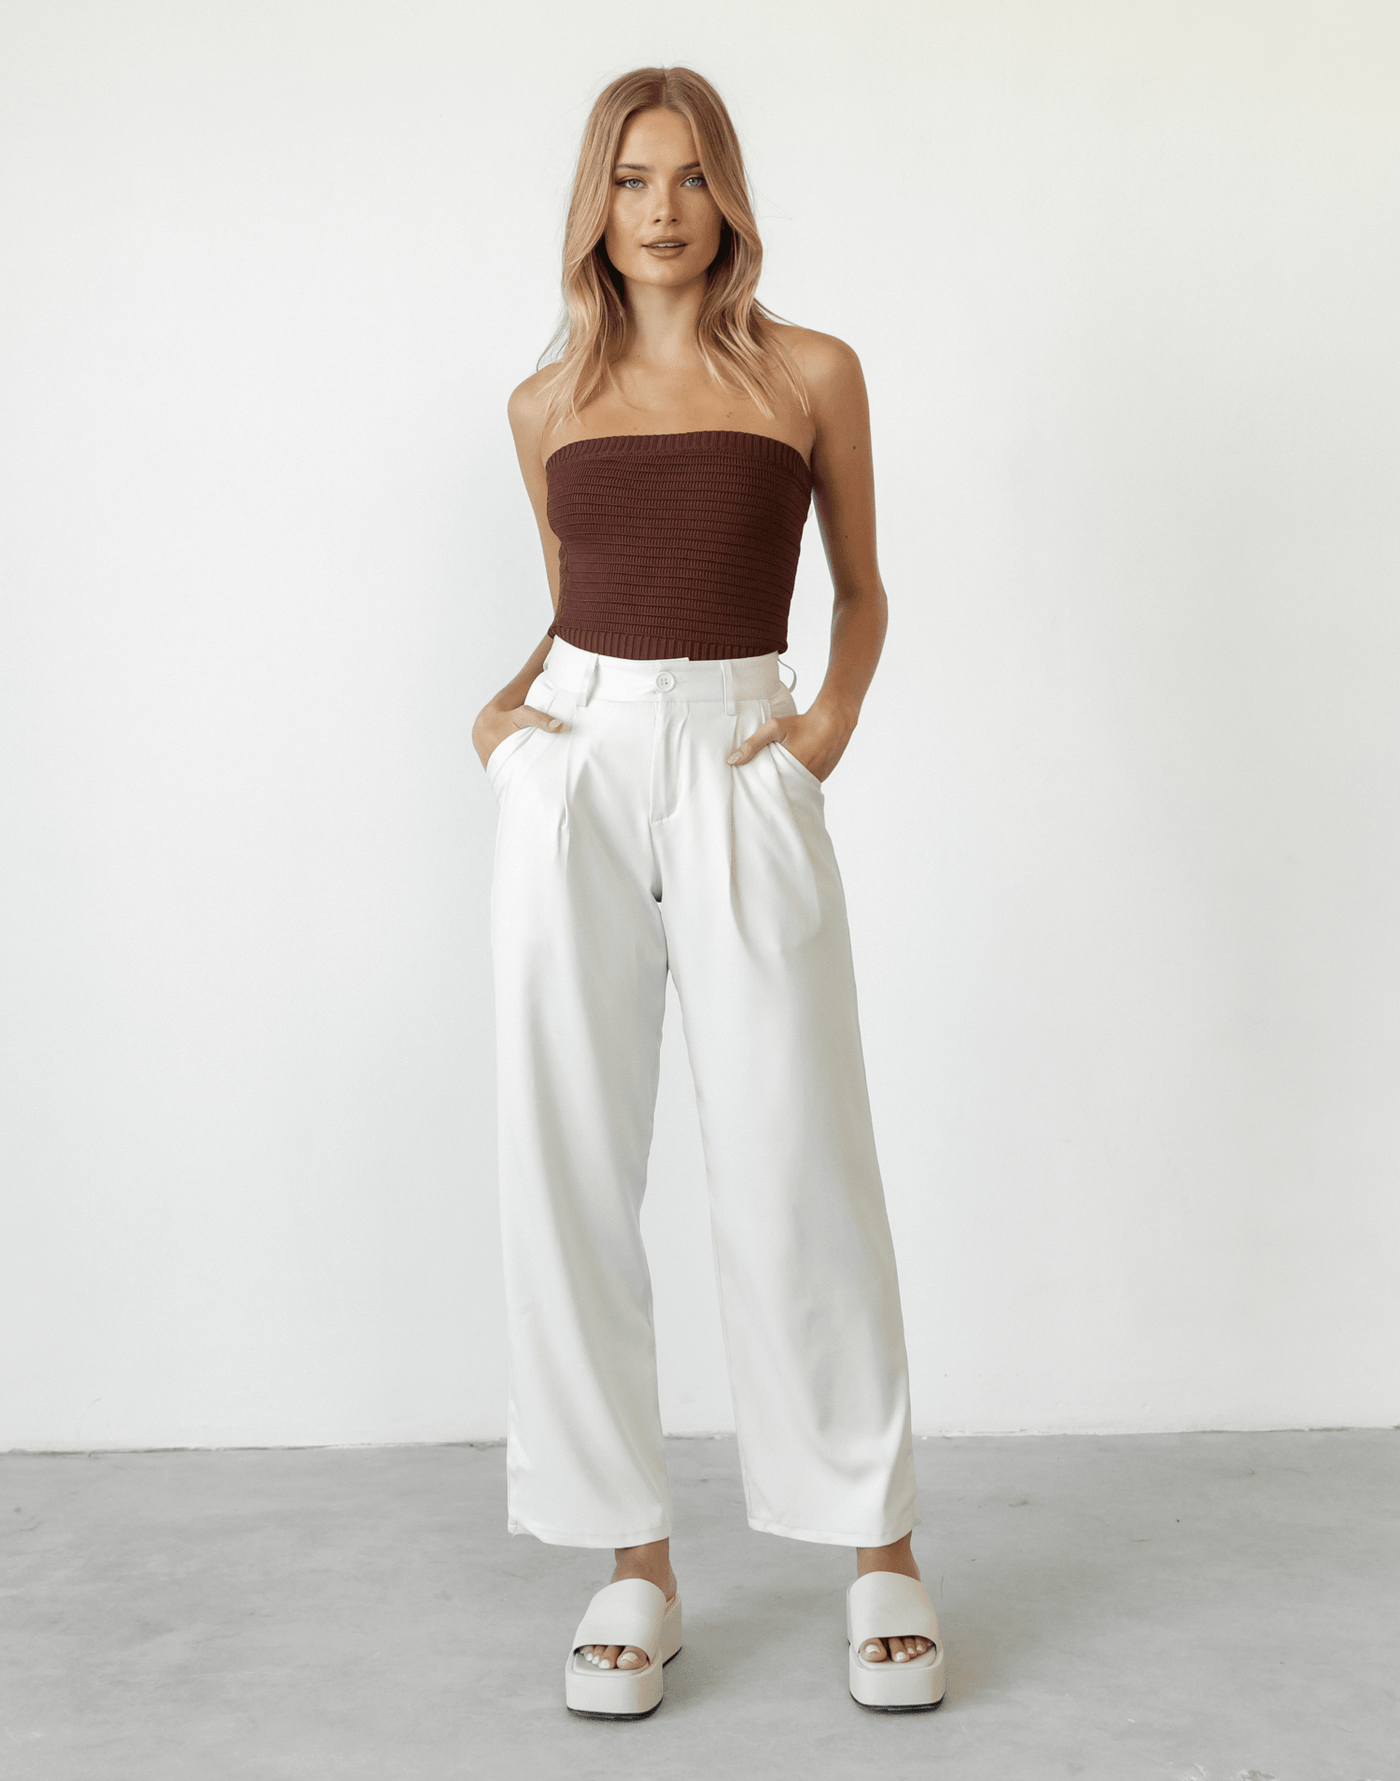 Lytton Strapless Crop Top (Brown) - Ribbed Knit Strapless Top - Women's Top - Charcoal Clothing